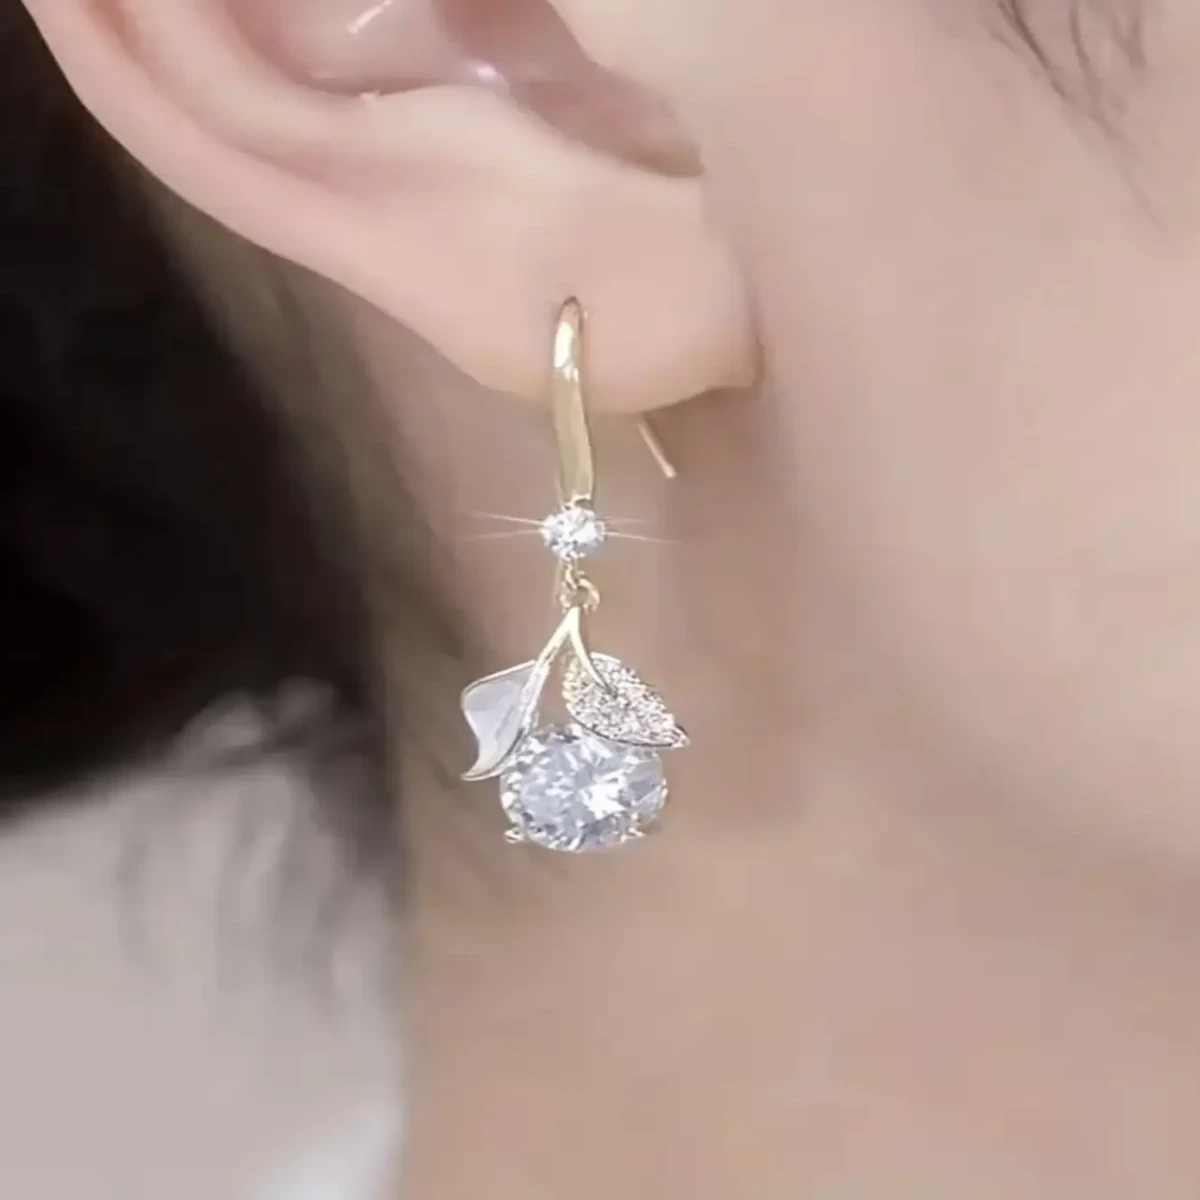 Her Lab Jewelry | Shiny zircon small earrings for women, simple temperament, exquisite and versatile ear hooks